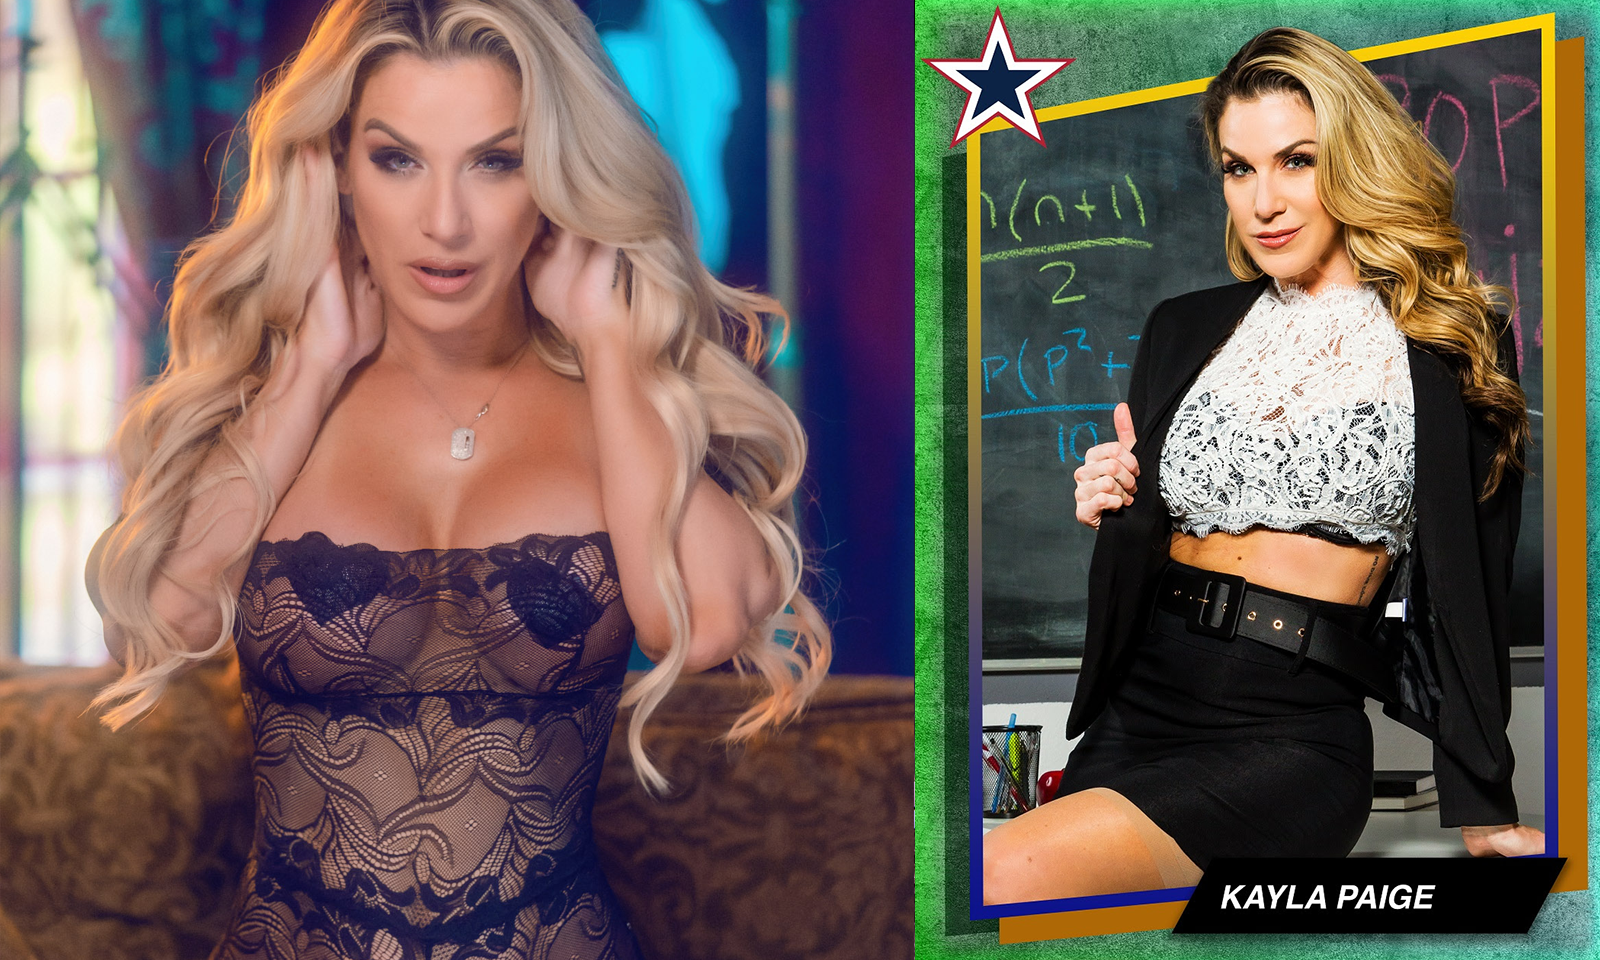 Kayla Paige, Naughty America Offer 2 Trading Cards as NFTs